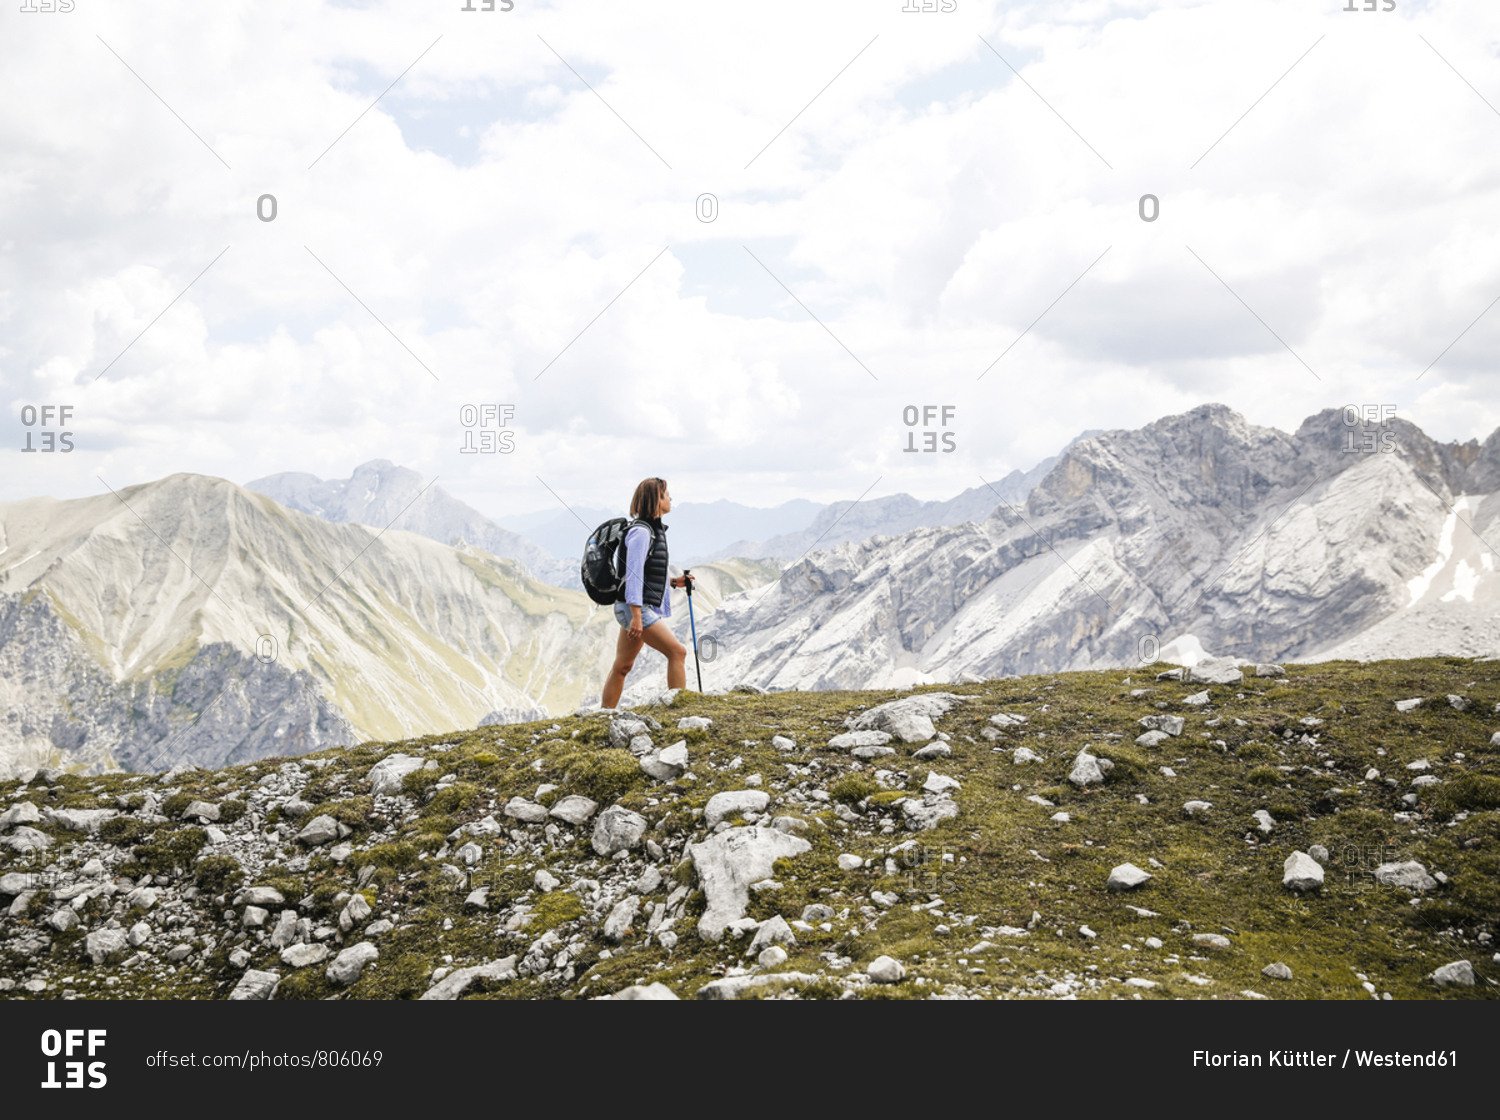 Austria- Tyrol- woman on a hiking trip in the mountains